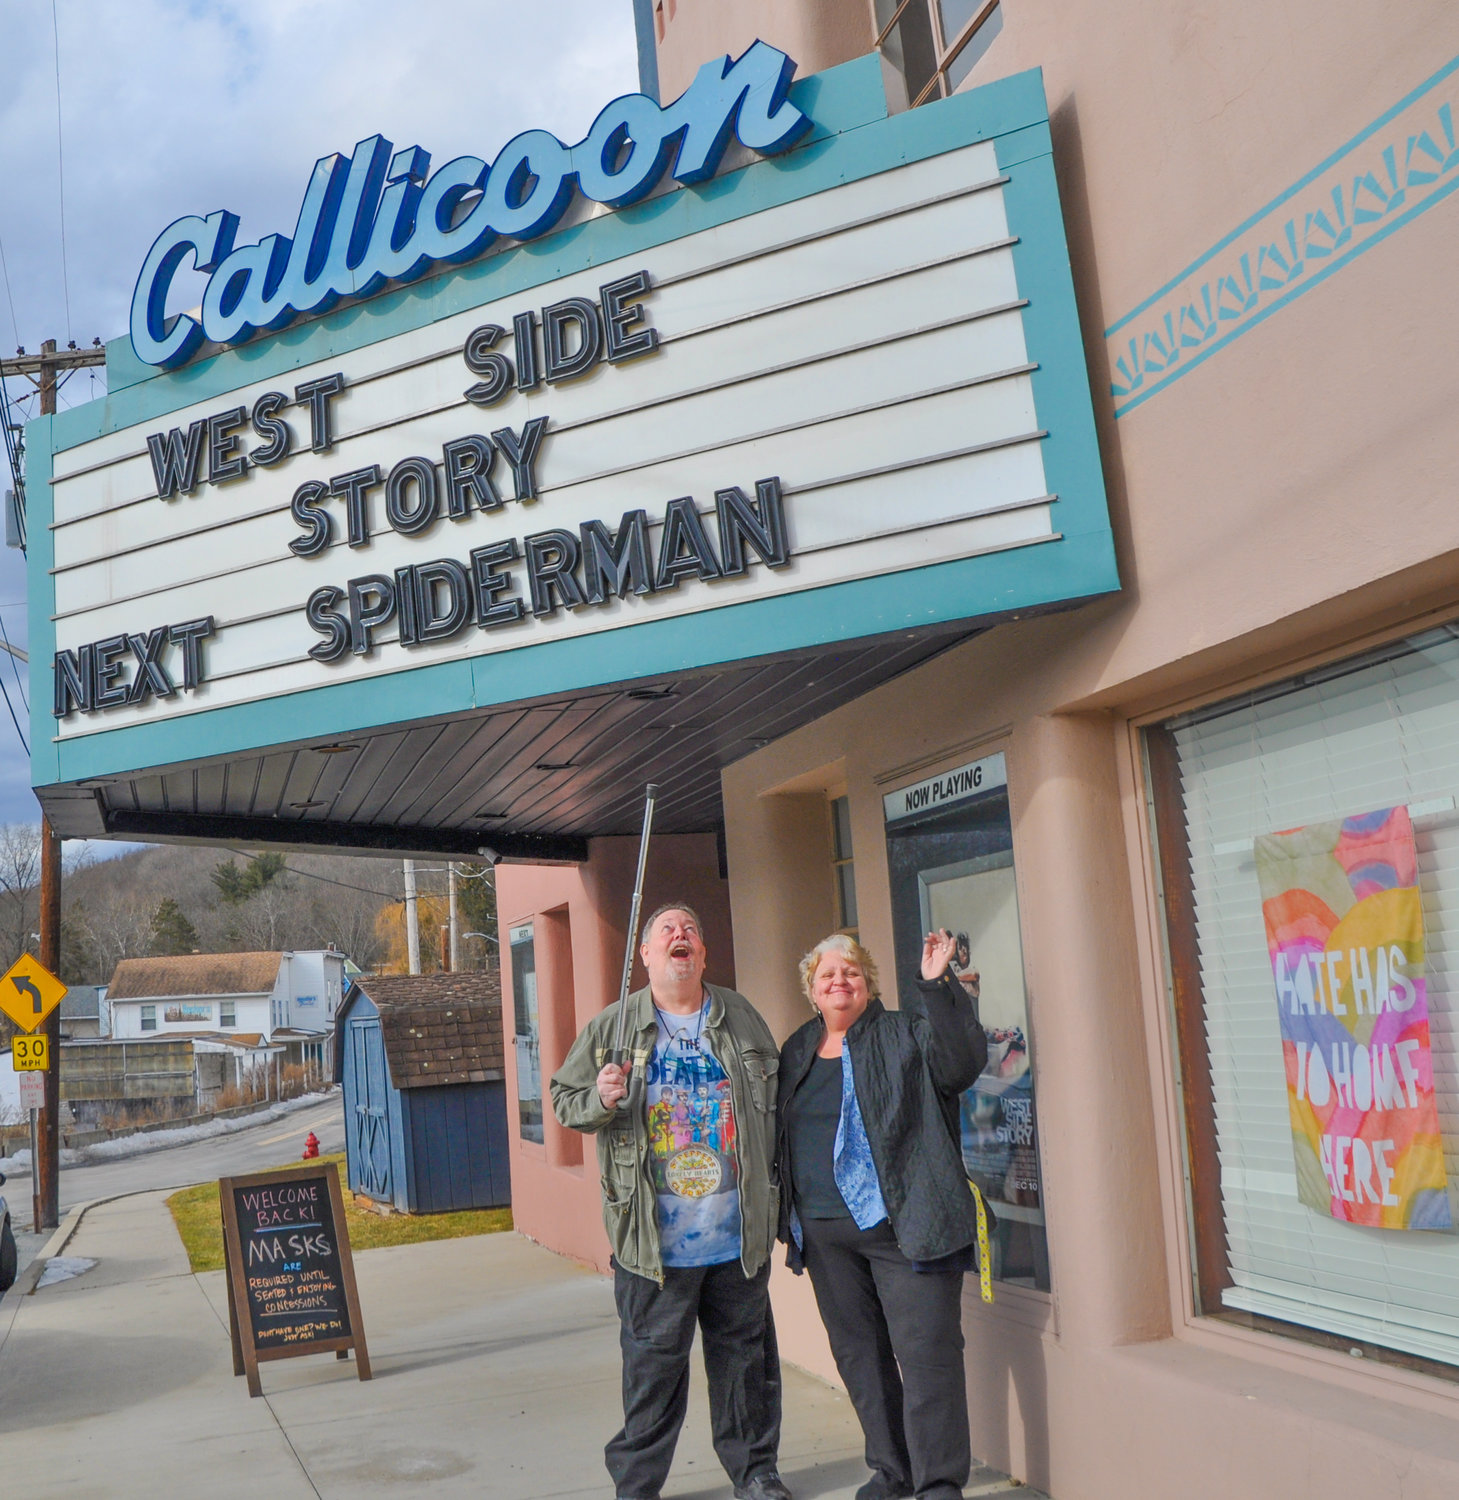 The River Reporter's Kathy Leggio was at the newly reopened Callicoon Theater with husband Danny to celebrate their Valentine’s Day wedding anniversary . “So you chose 'West Side Story'?” I asked. “Good choice—arguably one of the most romantic films of all time!”